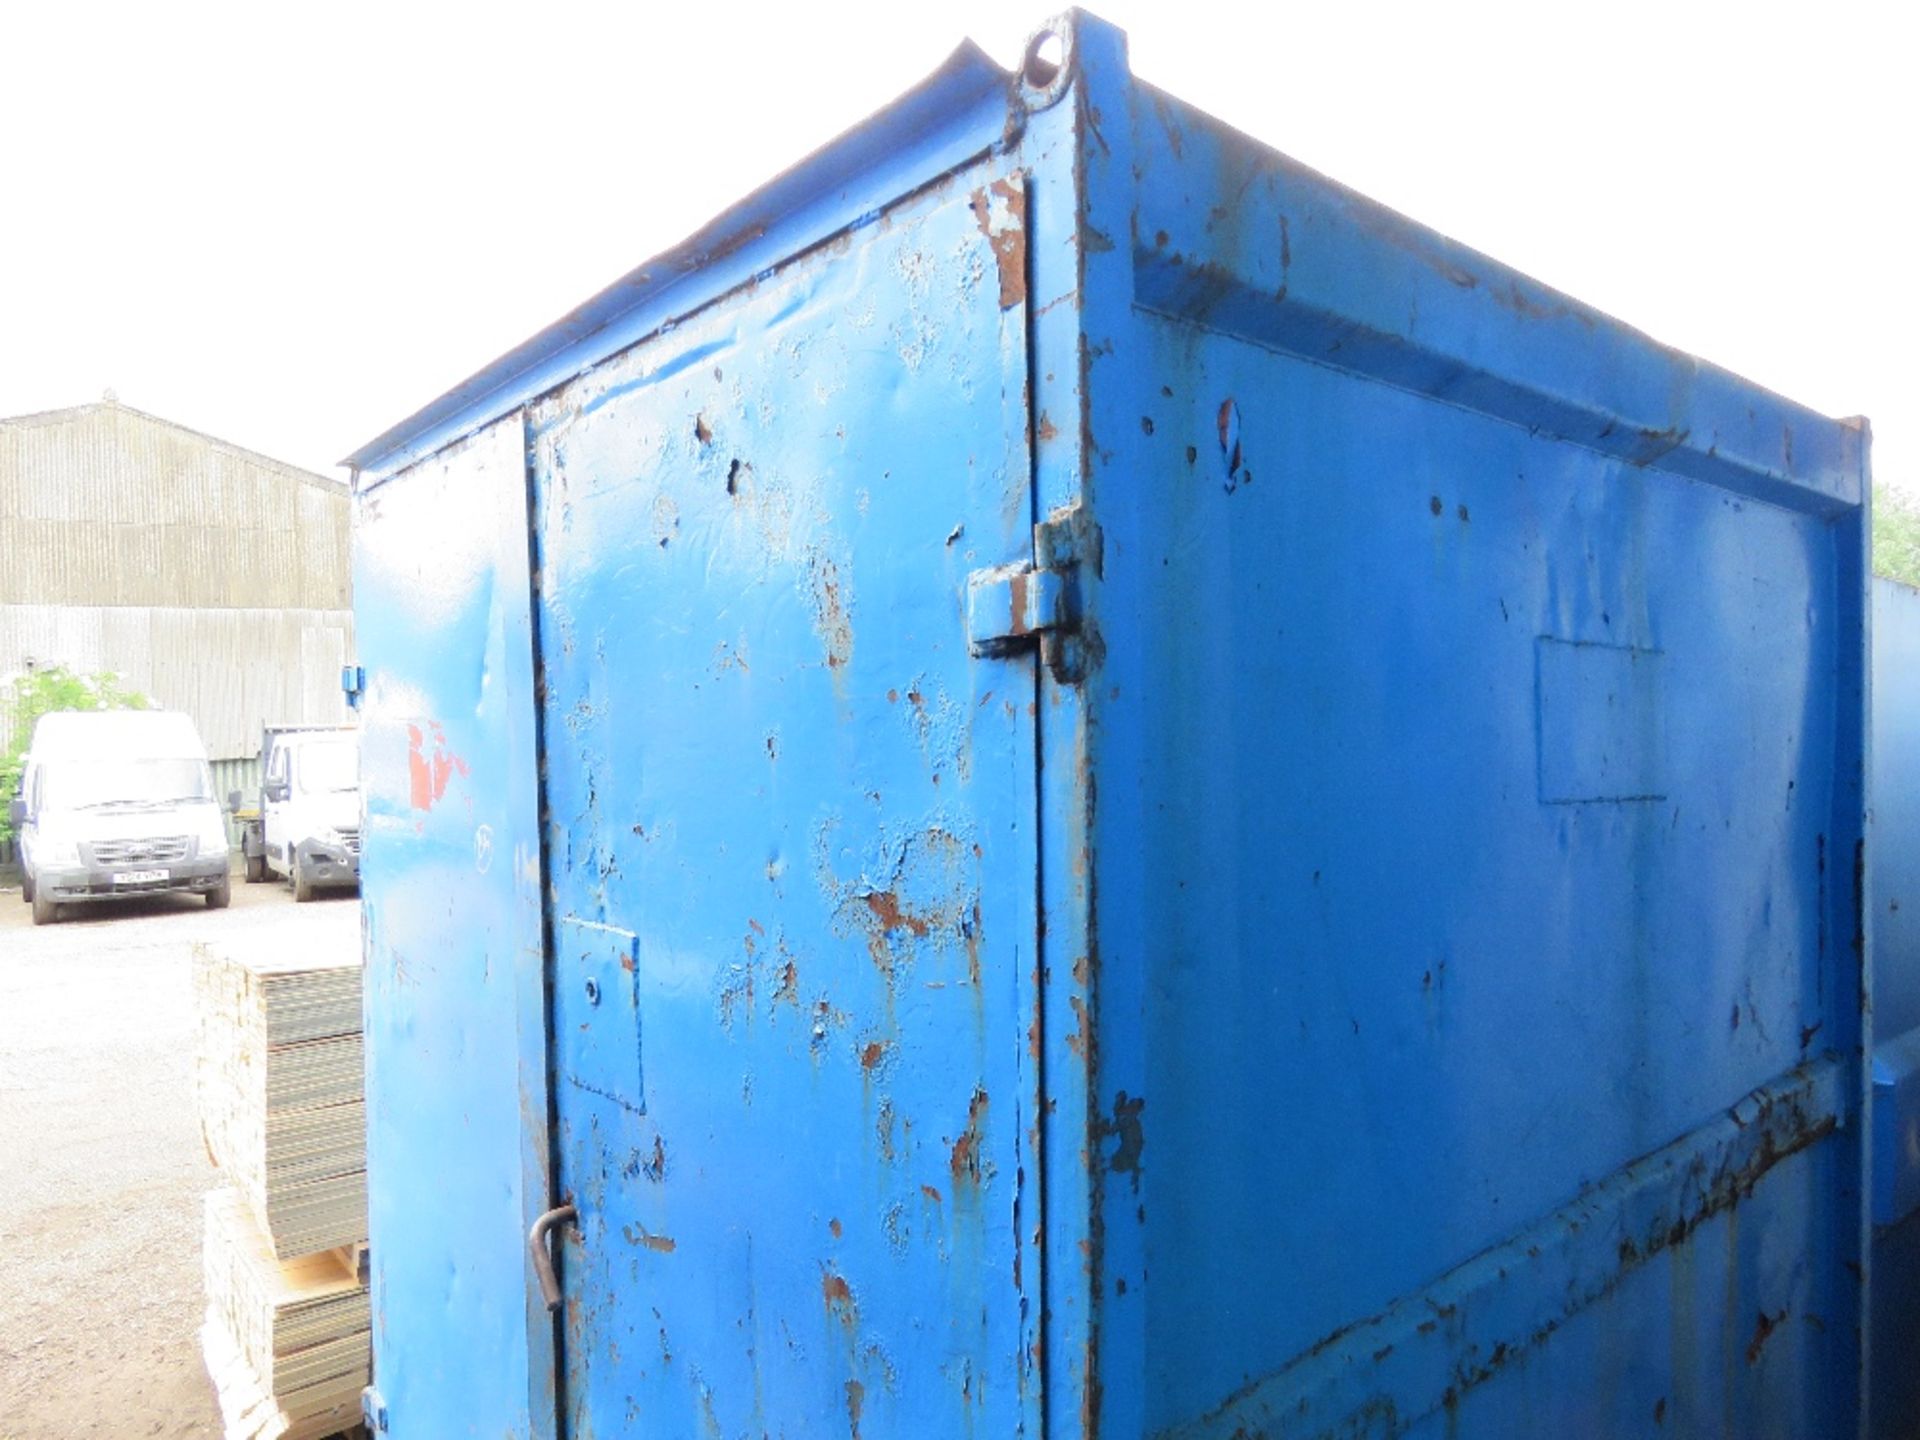 SECURE CONTAINER TYPE SITE STORE EXTERNAL SIZE 1.99M LENGTH X 2.3M HEIGHT X 1.99M WIDE APPROX. - Image 8 of 9